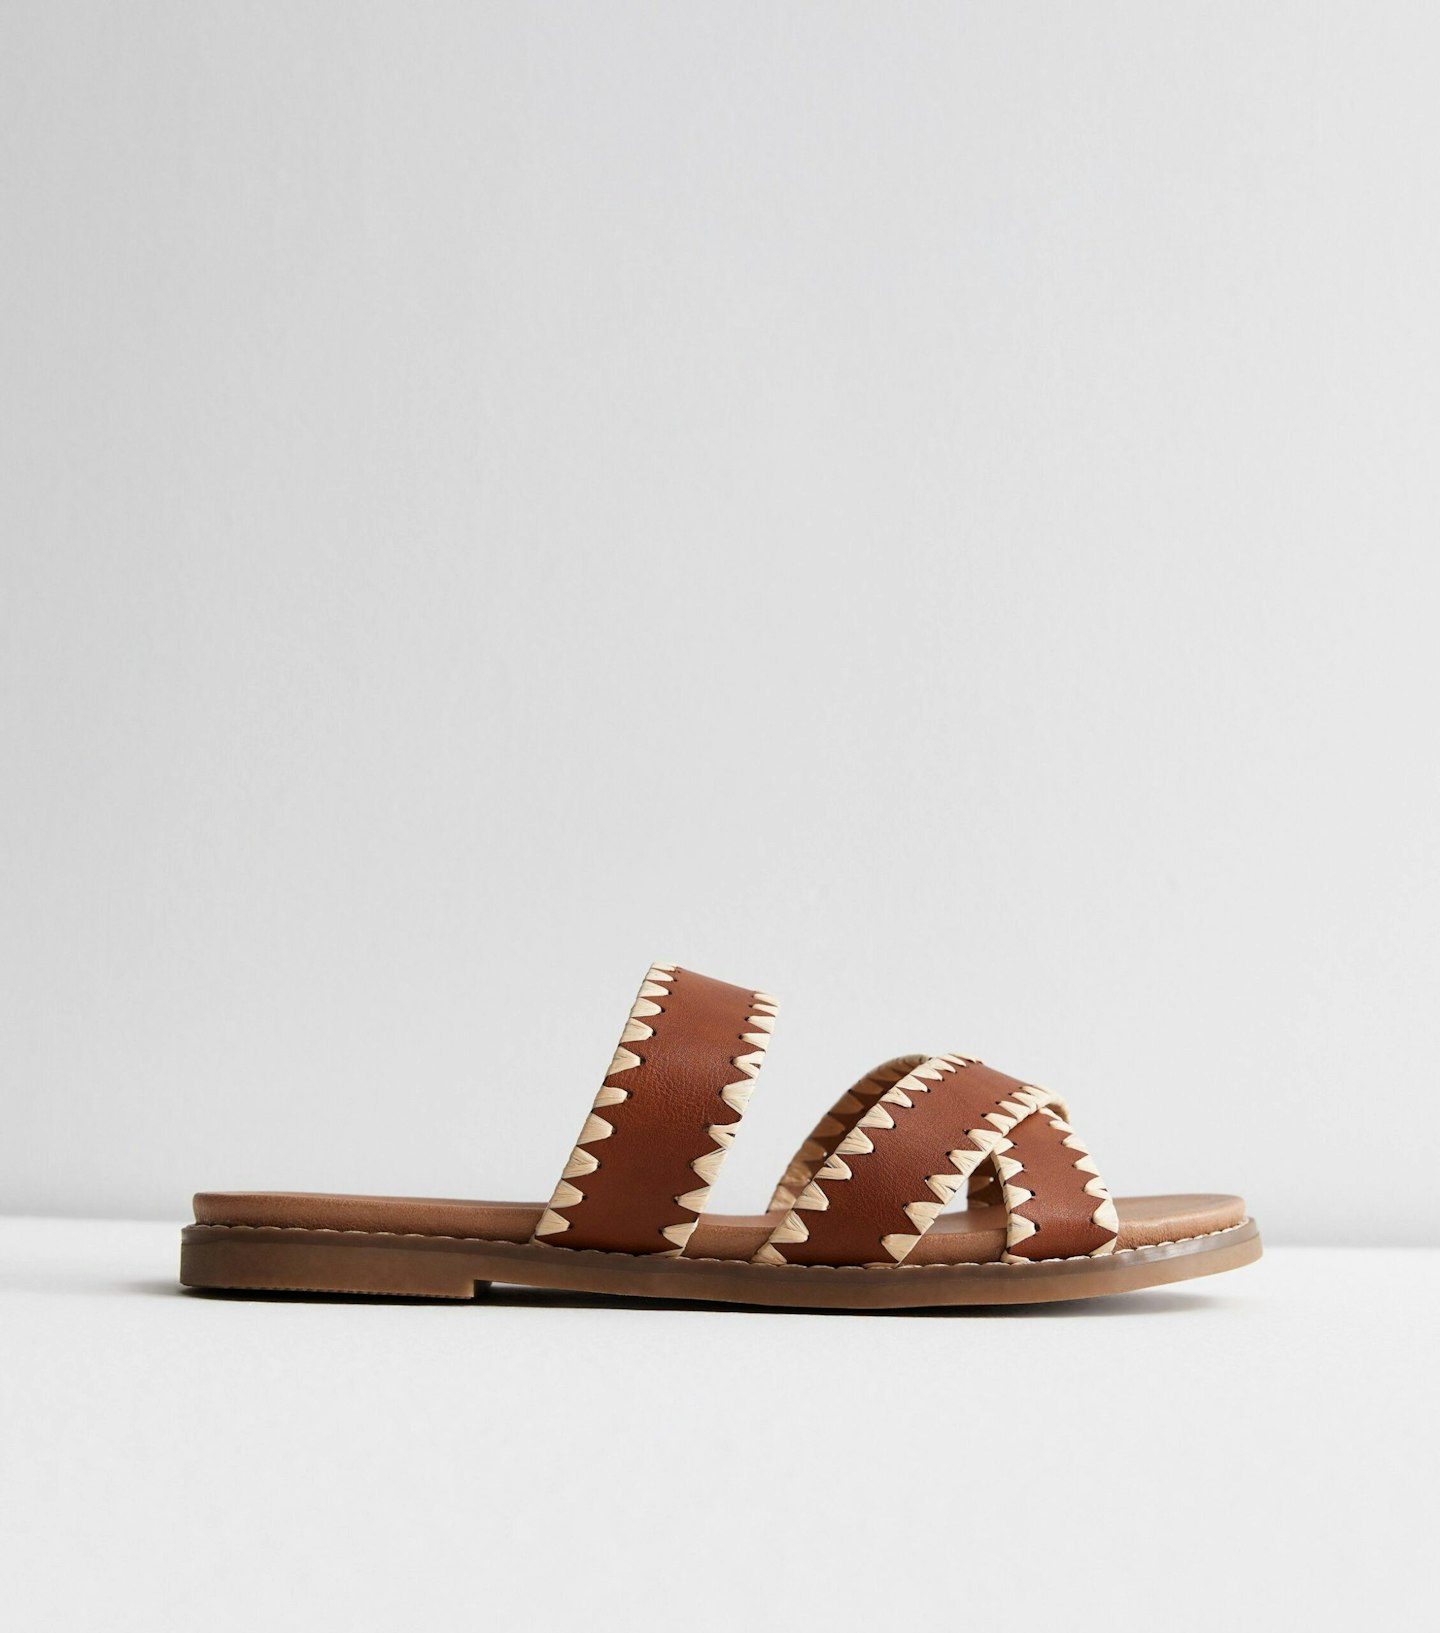 New Look Tan Leather-Look Stitch Cross Over Sliders